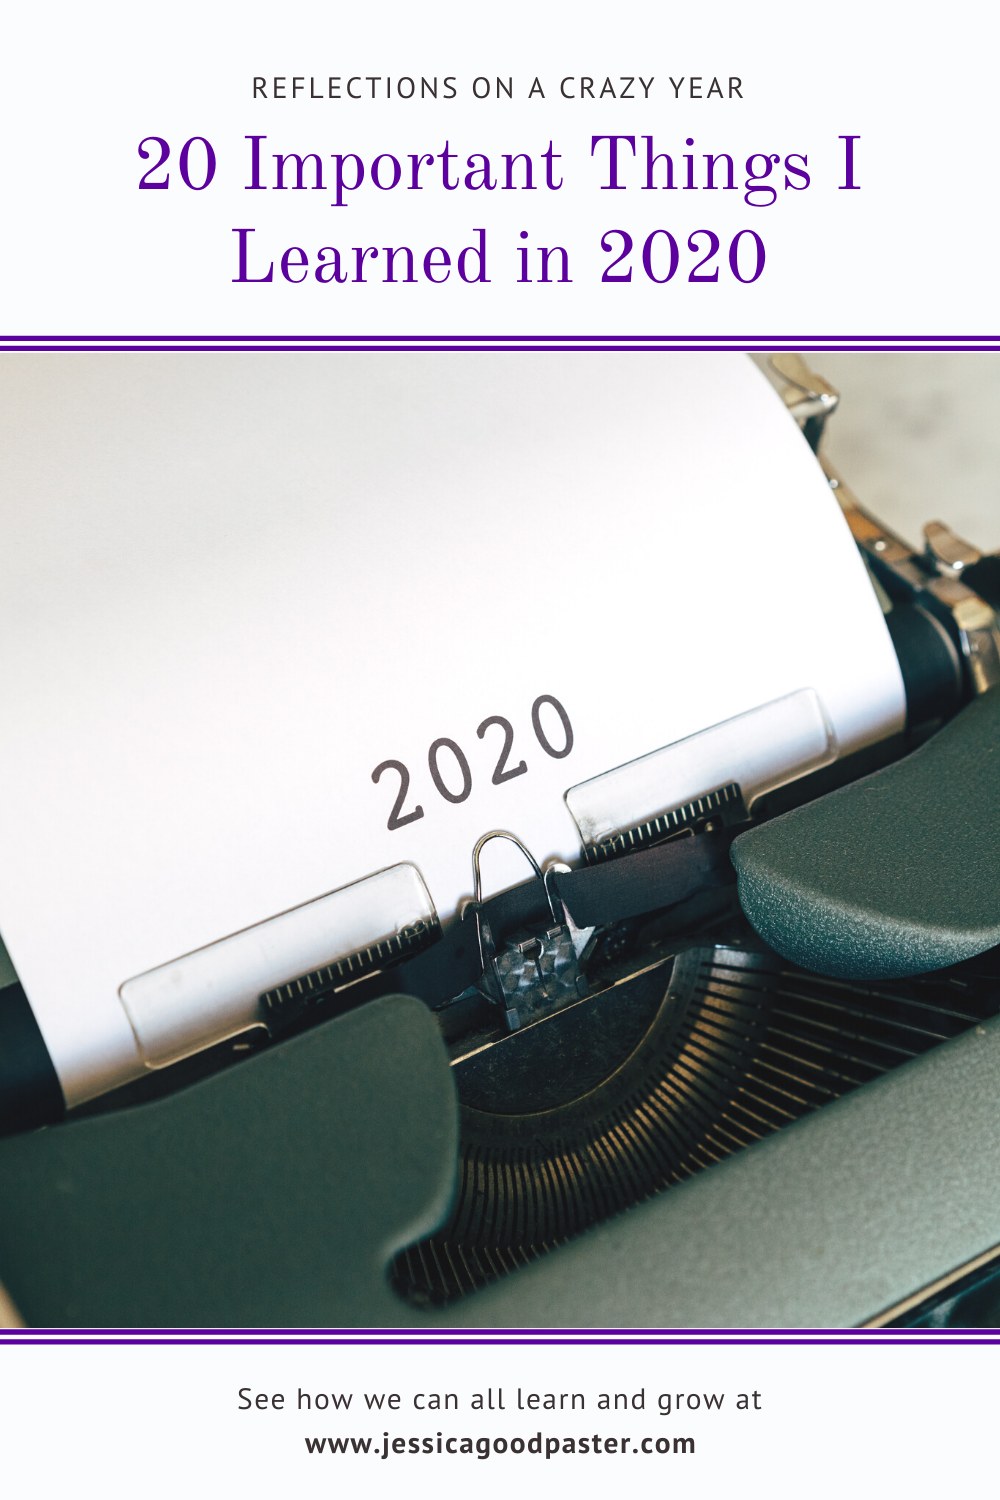 As we head into the New Year, it's important to look back and reflect on what we've learned in 2020 before attempting to set New Year's resolutions for 2021. See the lessons I've learned from this tumultous year and how you can grow from what we've all been through. #2020lessons #newyear #newyearsresolutions #goodbye2020 #newyearnewyou #reflections #learnandgrow